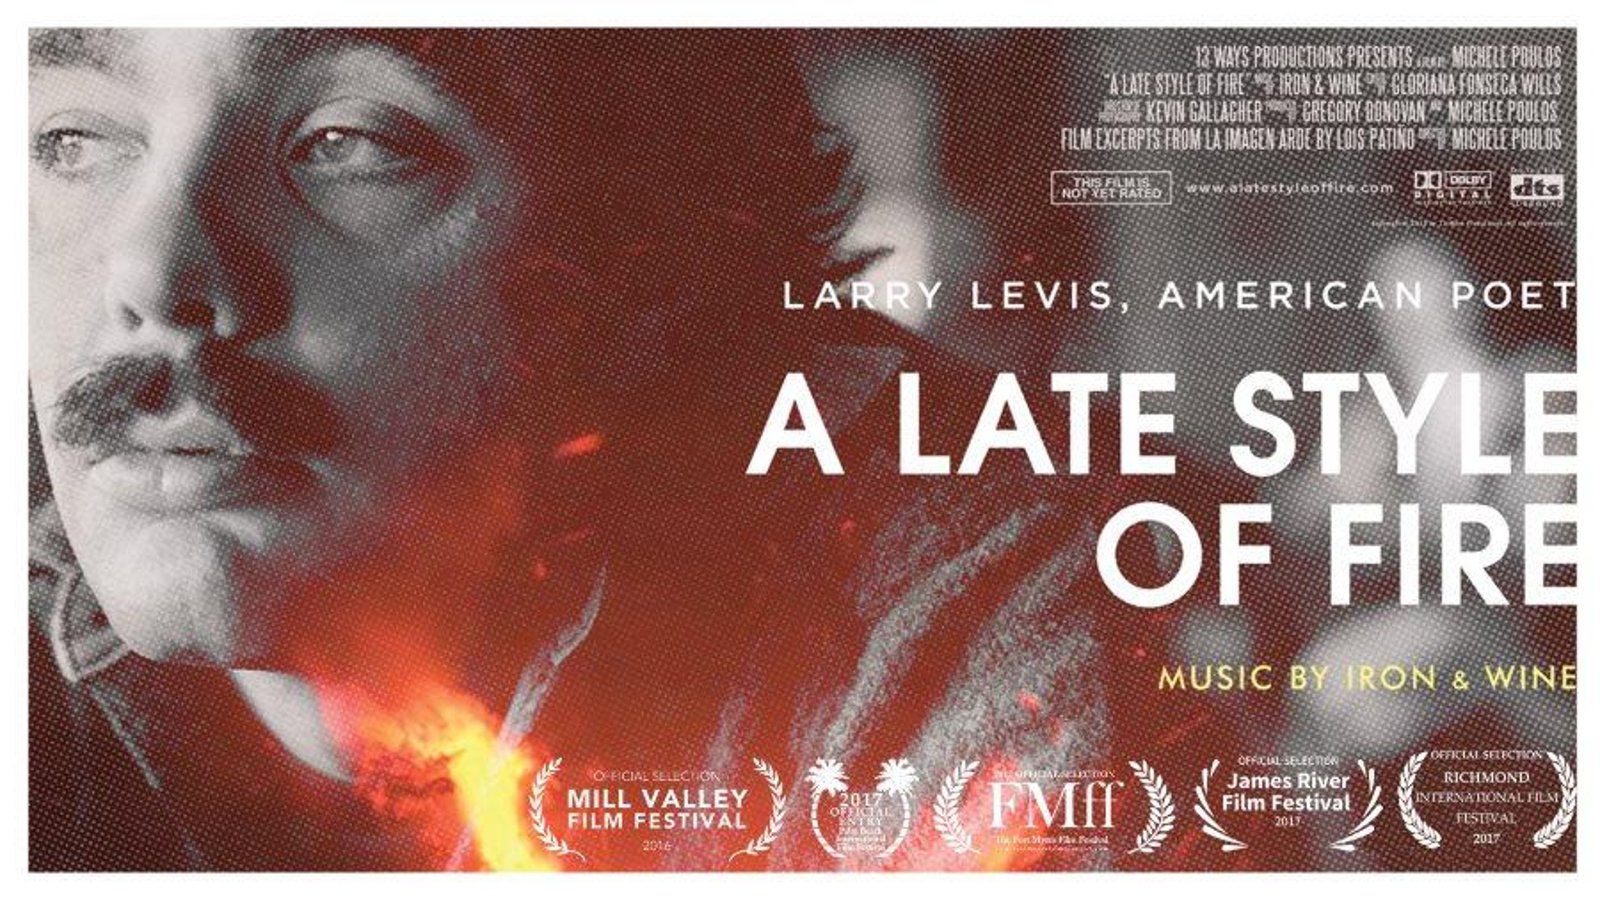 A Late Style of Fire - Larry Levis, American Poet